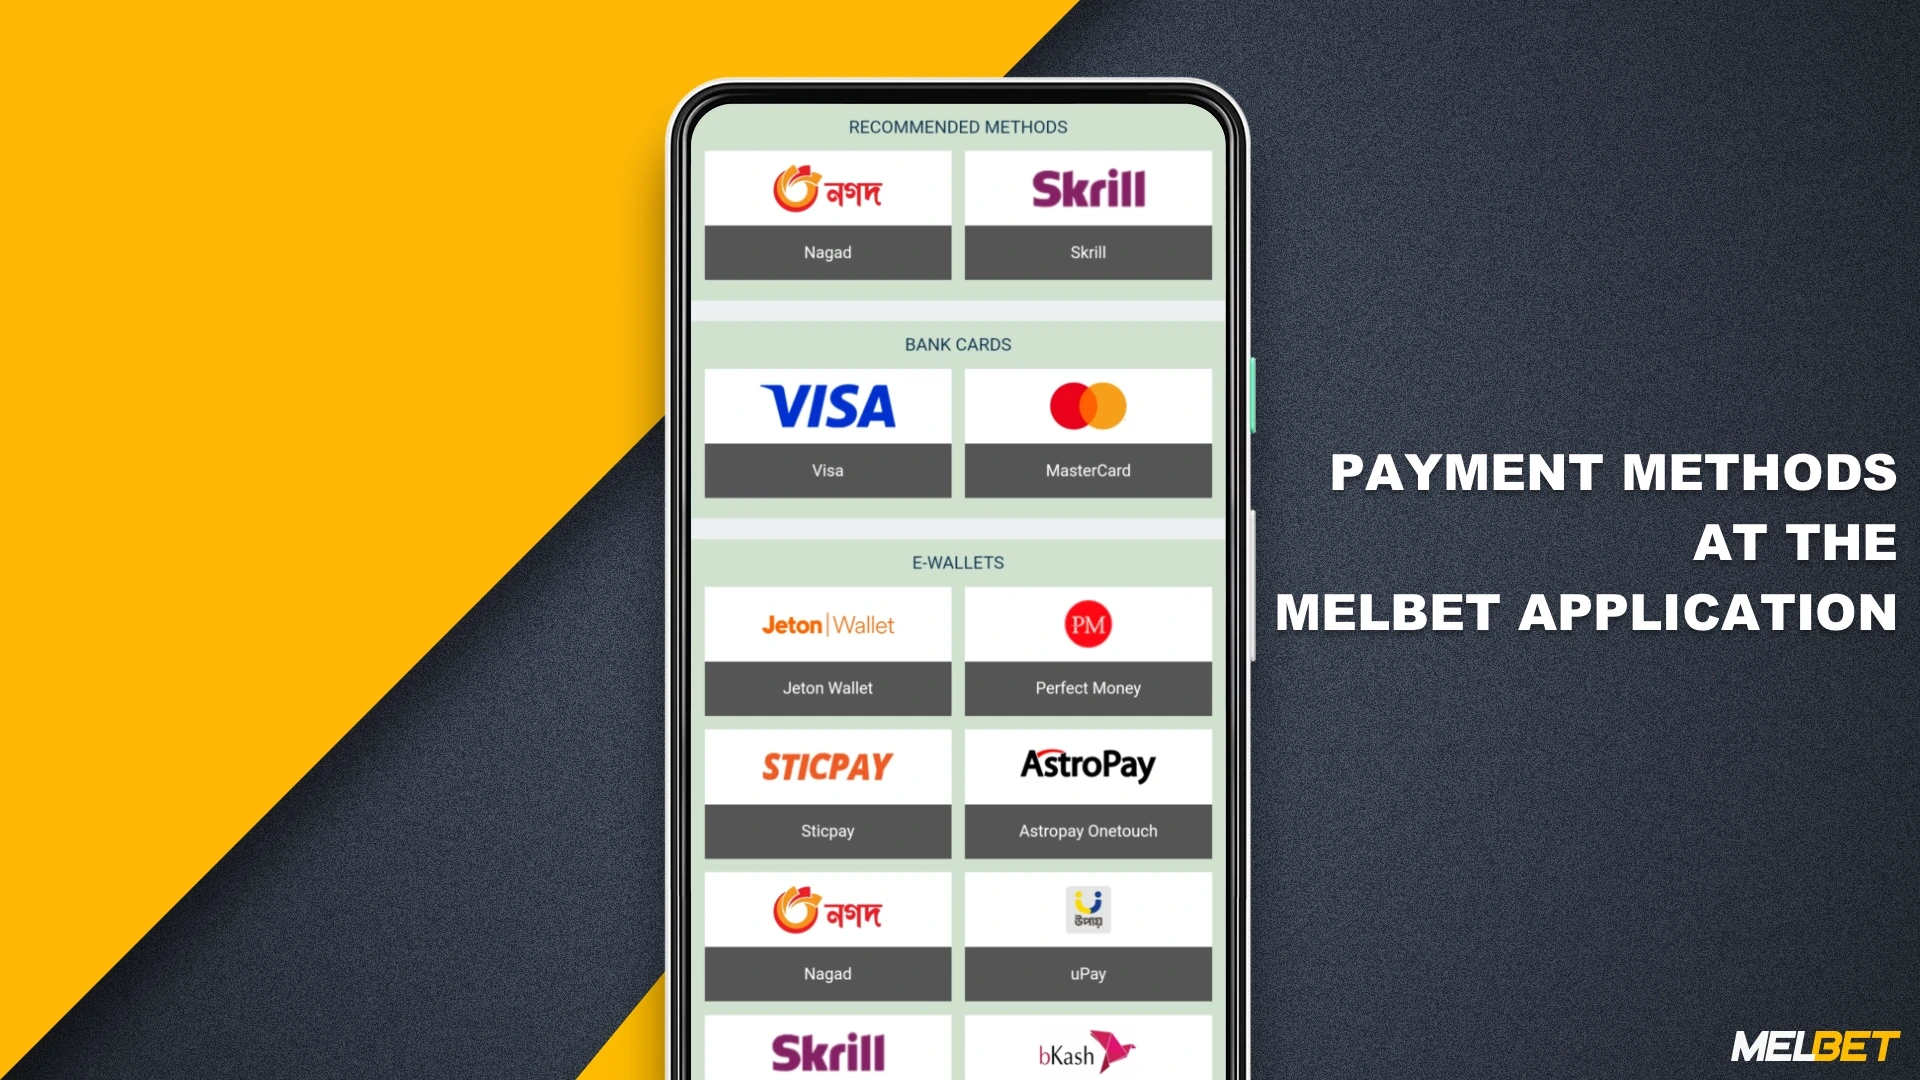 The Melbet mobile app has a wide range of payment systems that can be used to make deposits or withdrawals